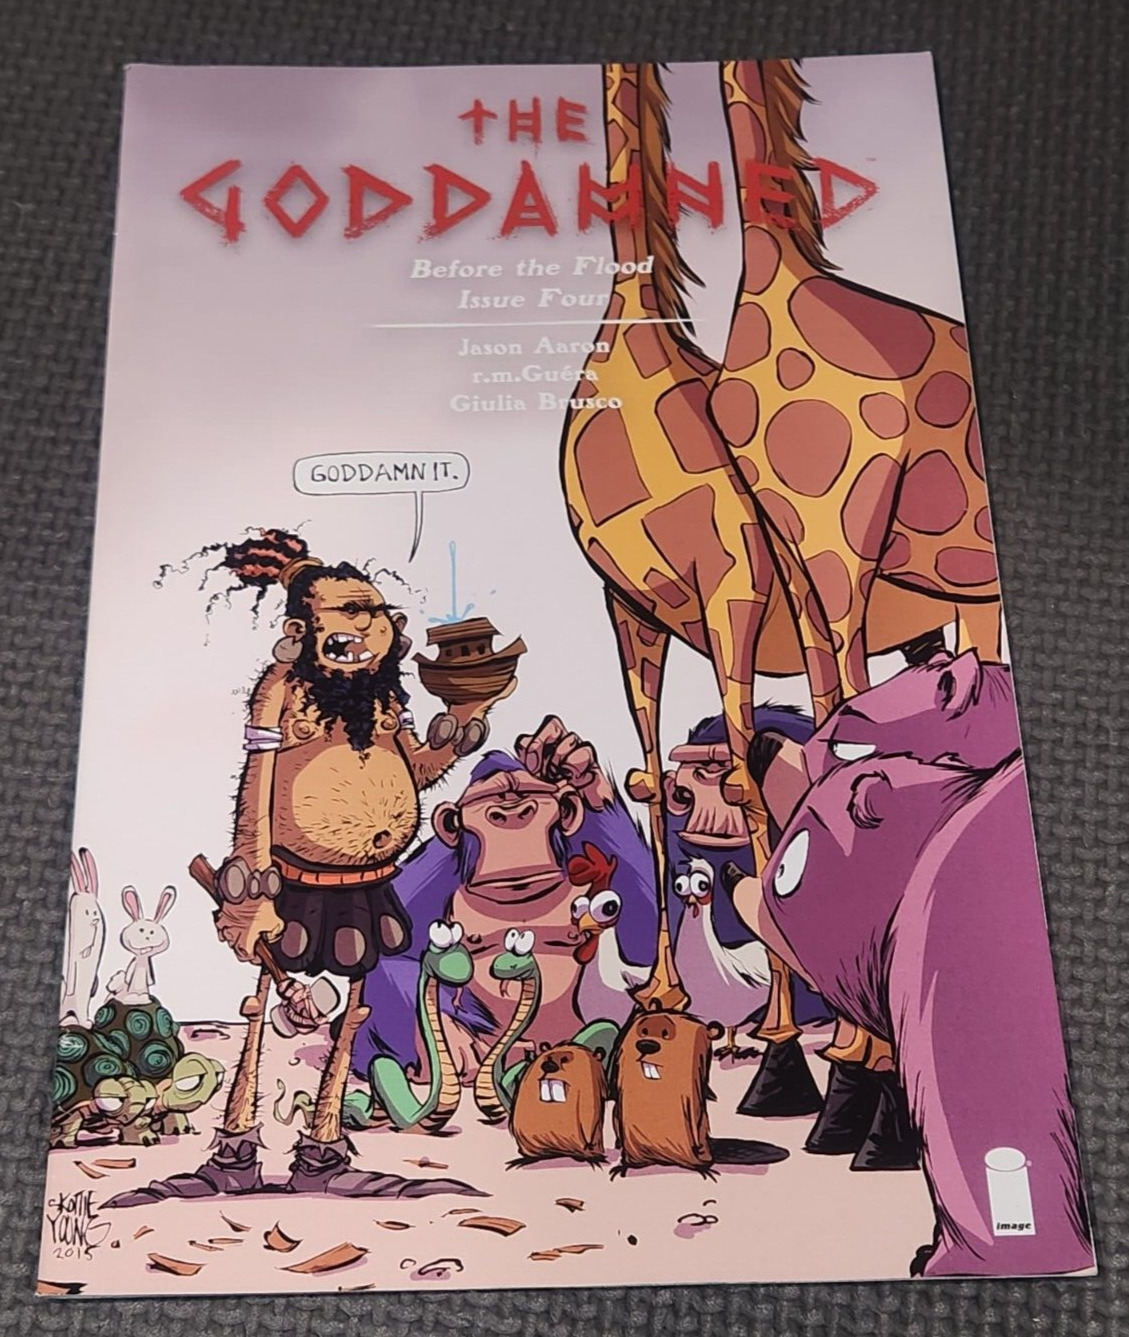 THE GODDAMNED #4 (2016) Before the Flood 1st Print Image Skottie Young Variant D